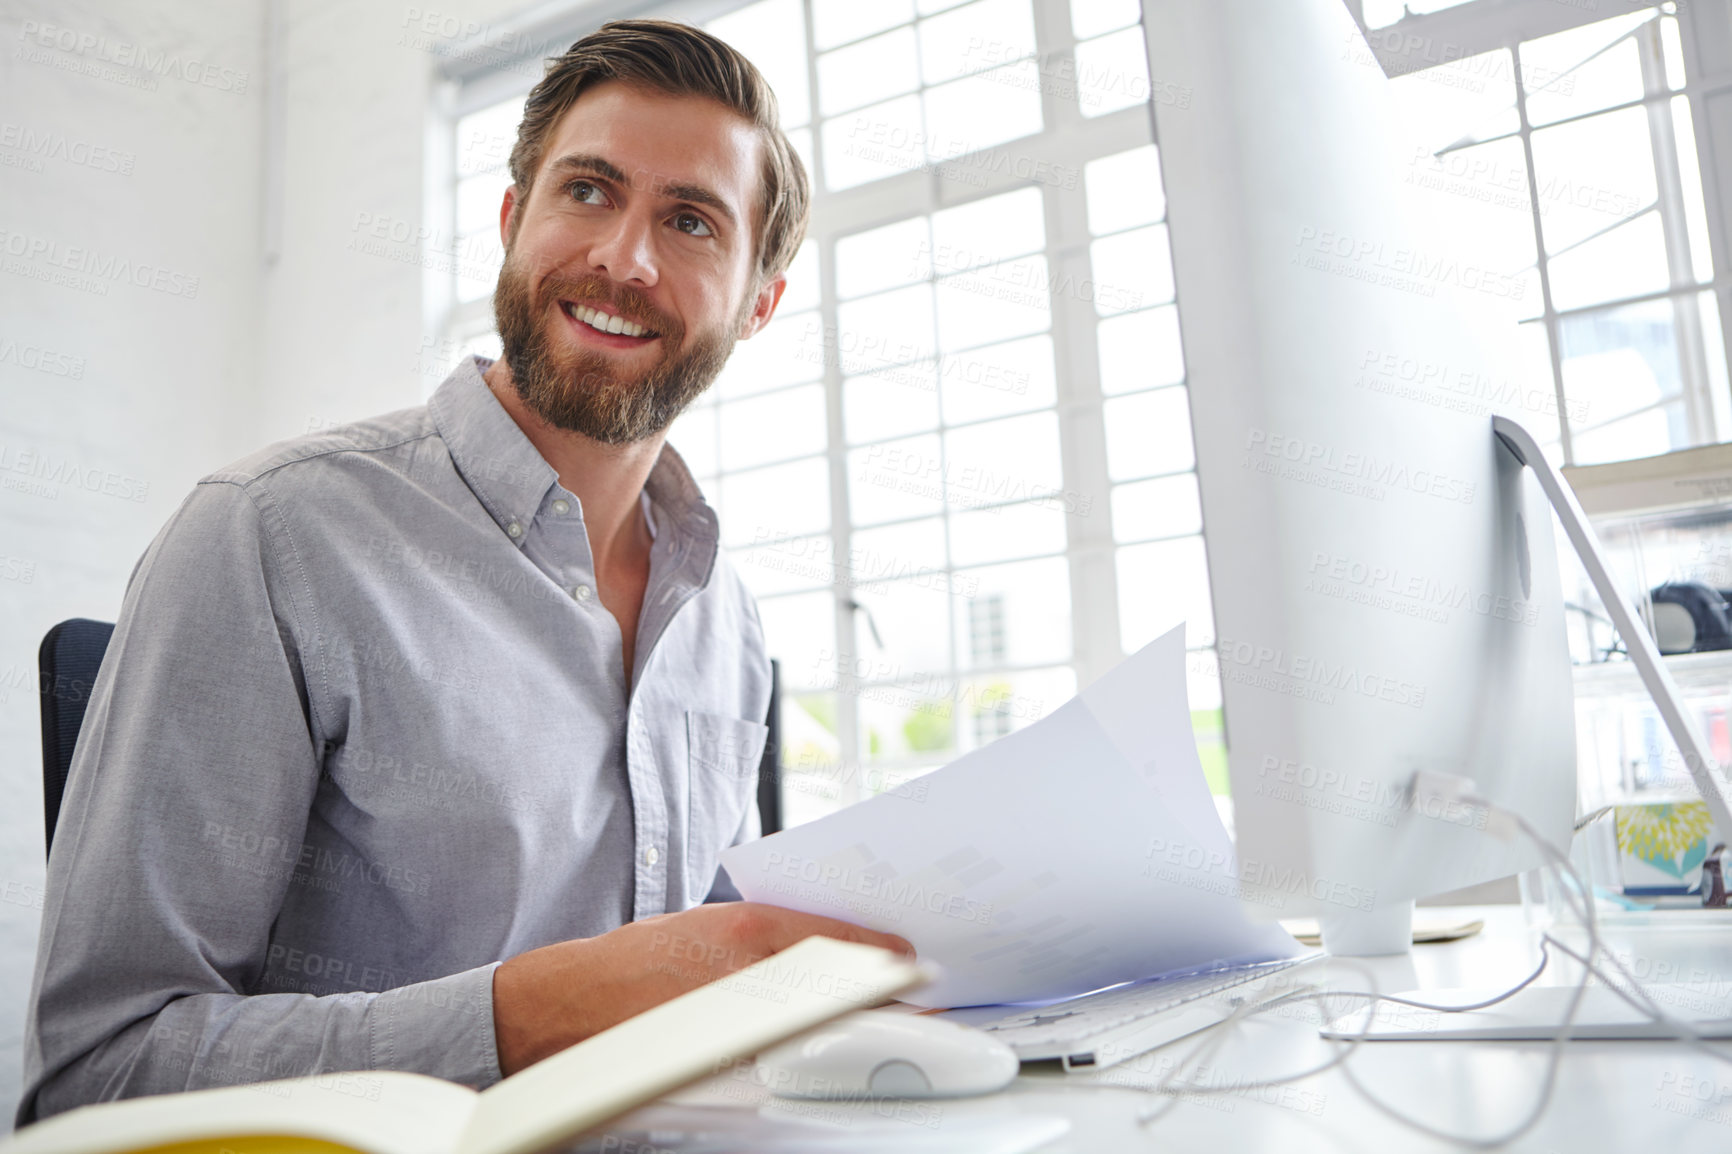 Buy stock photo Shot of a young designer holding paperwork while sitting in front of his computer